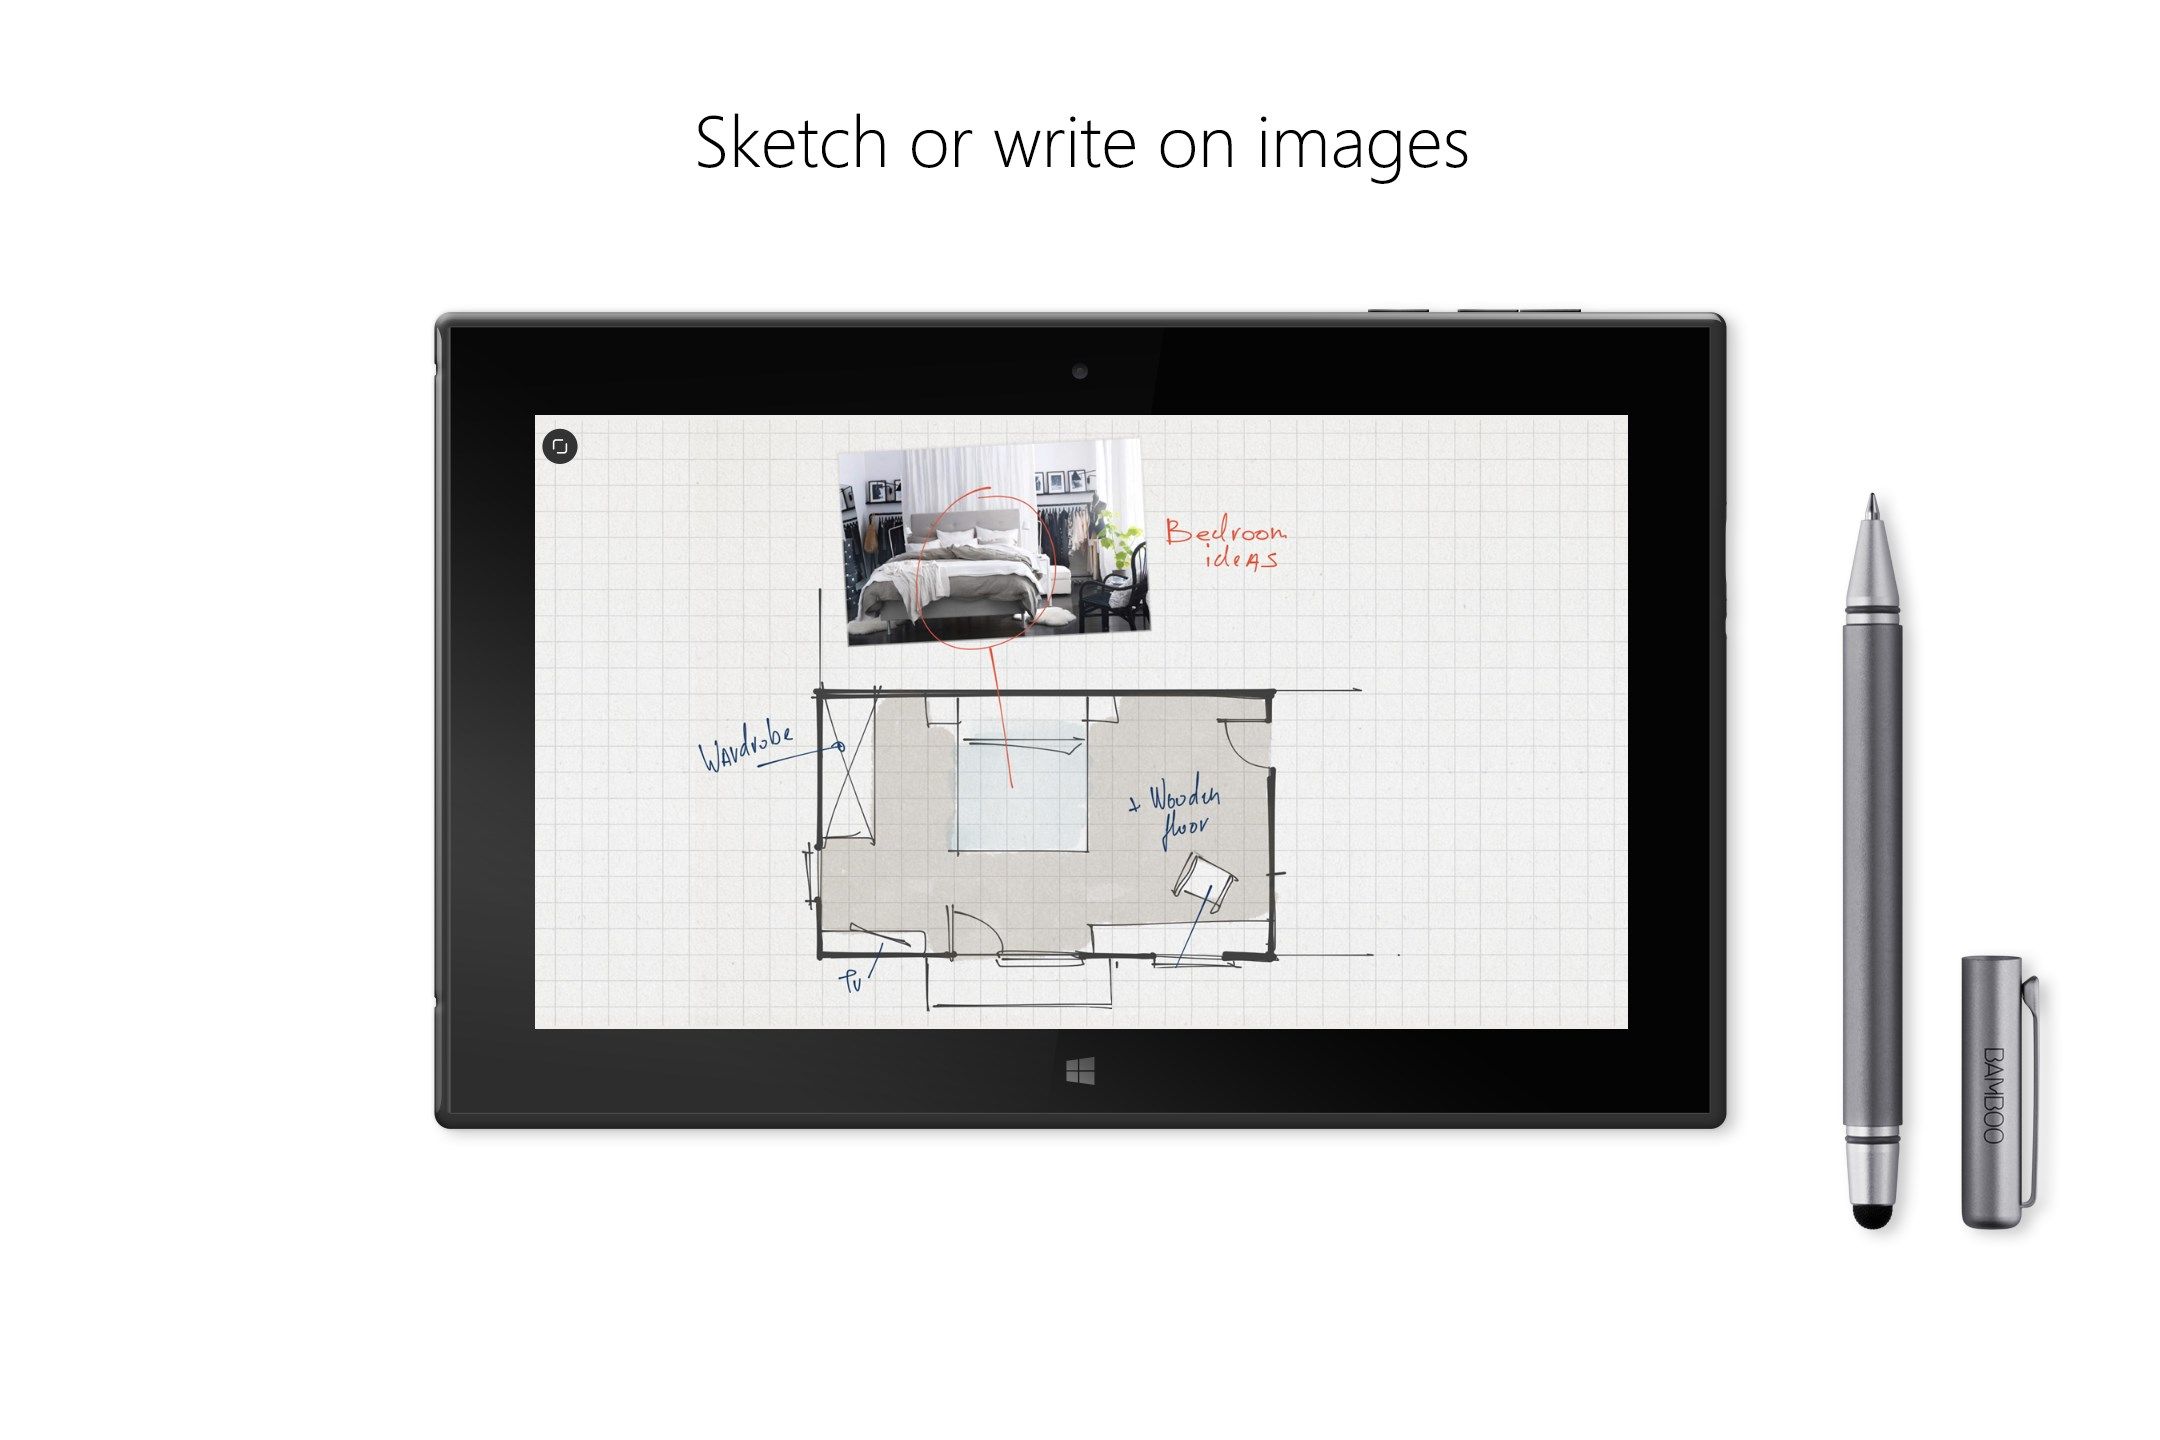 Sketch or write on images